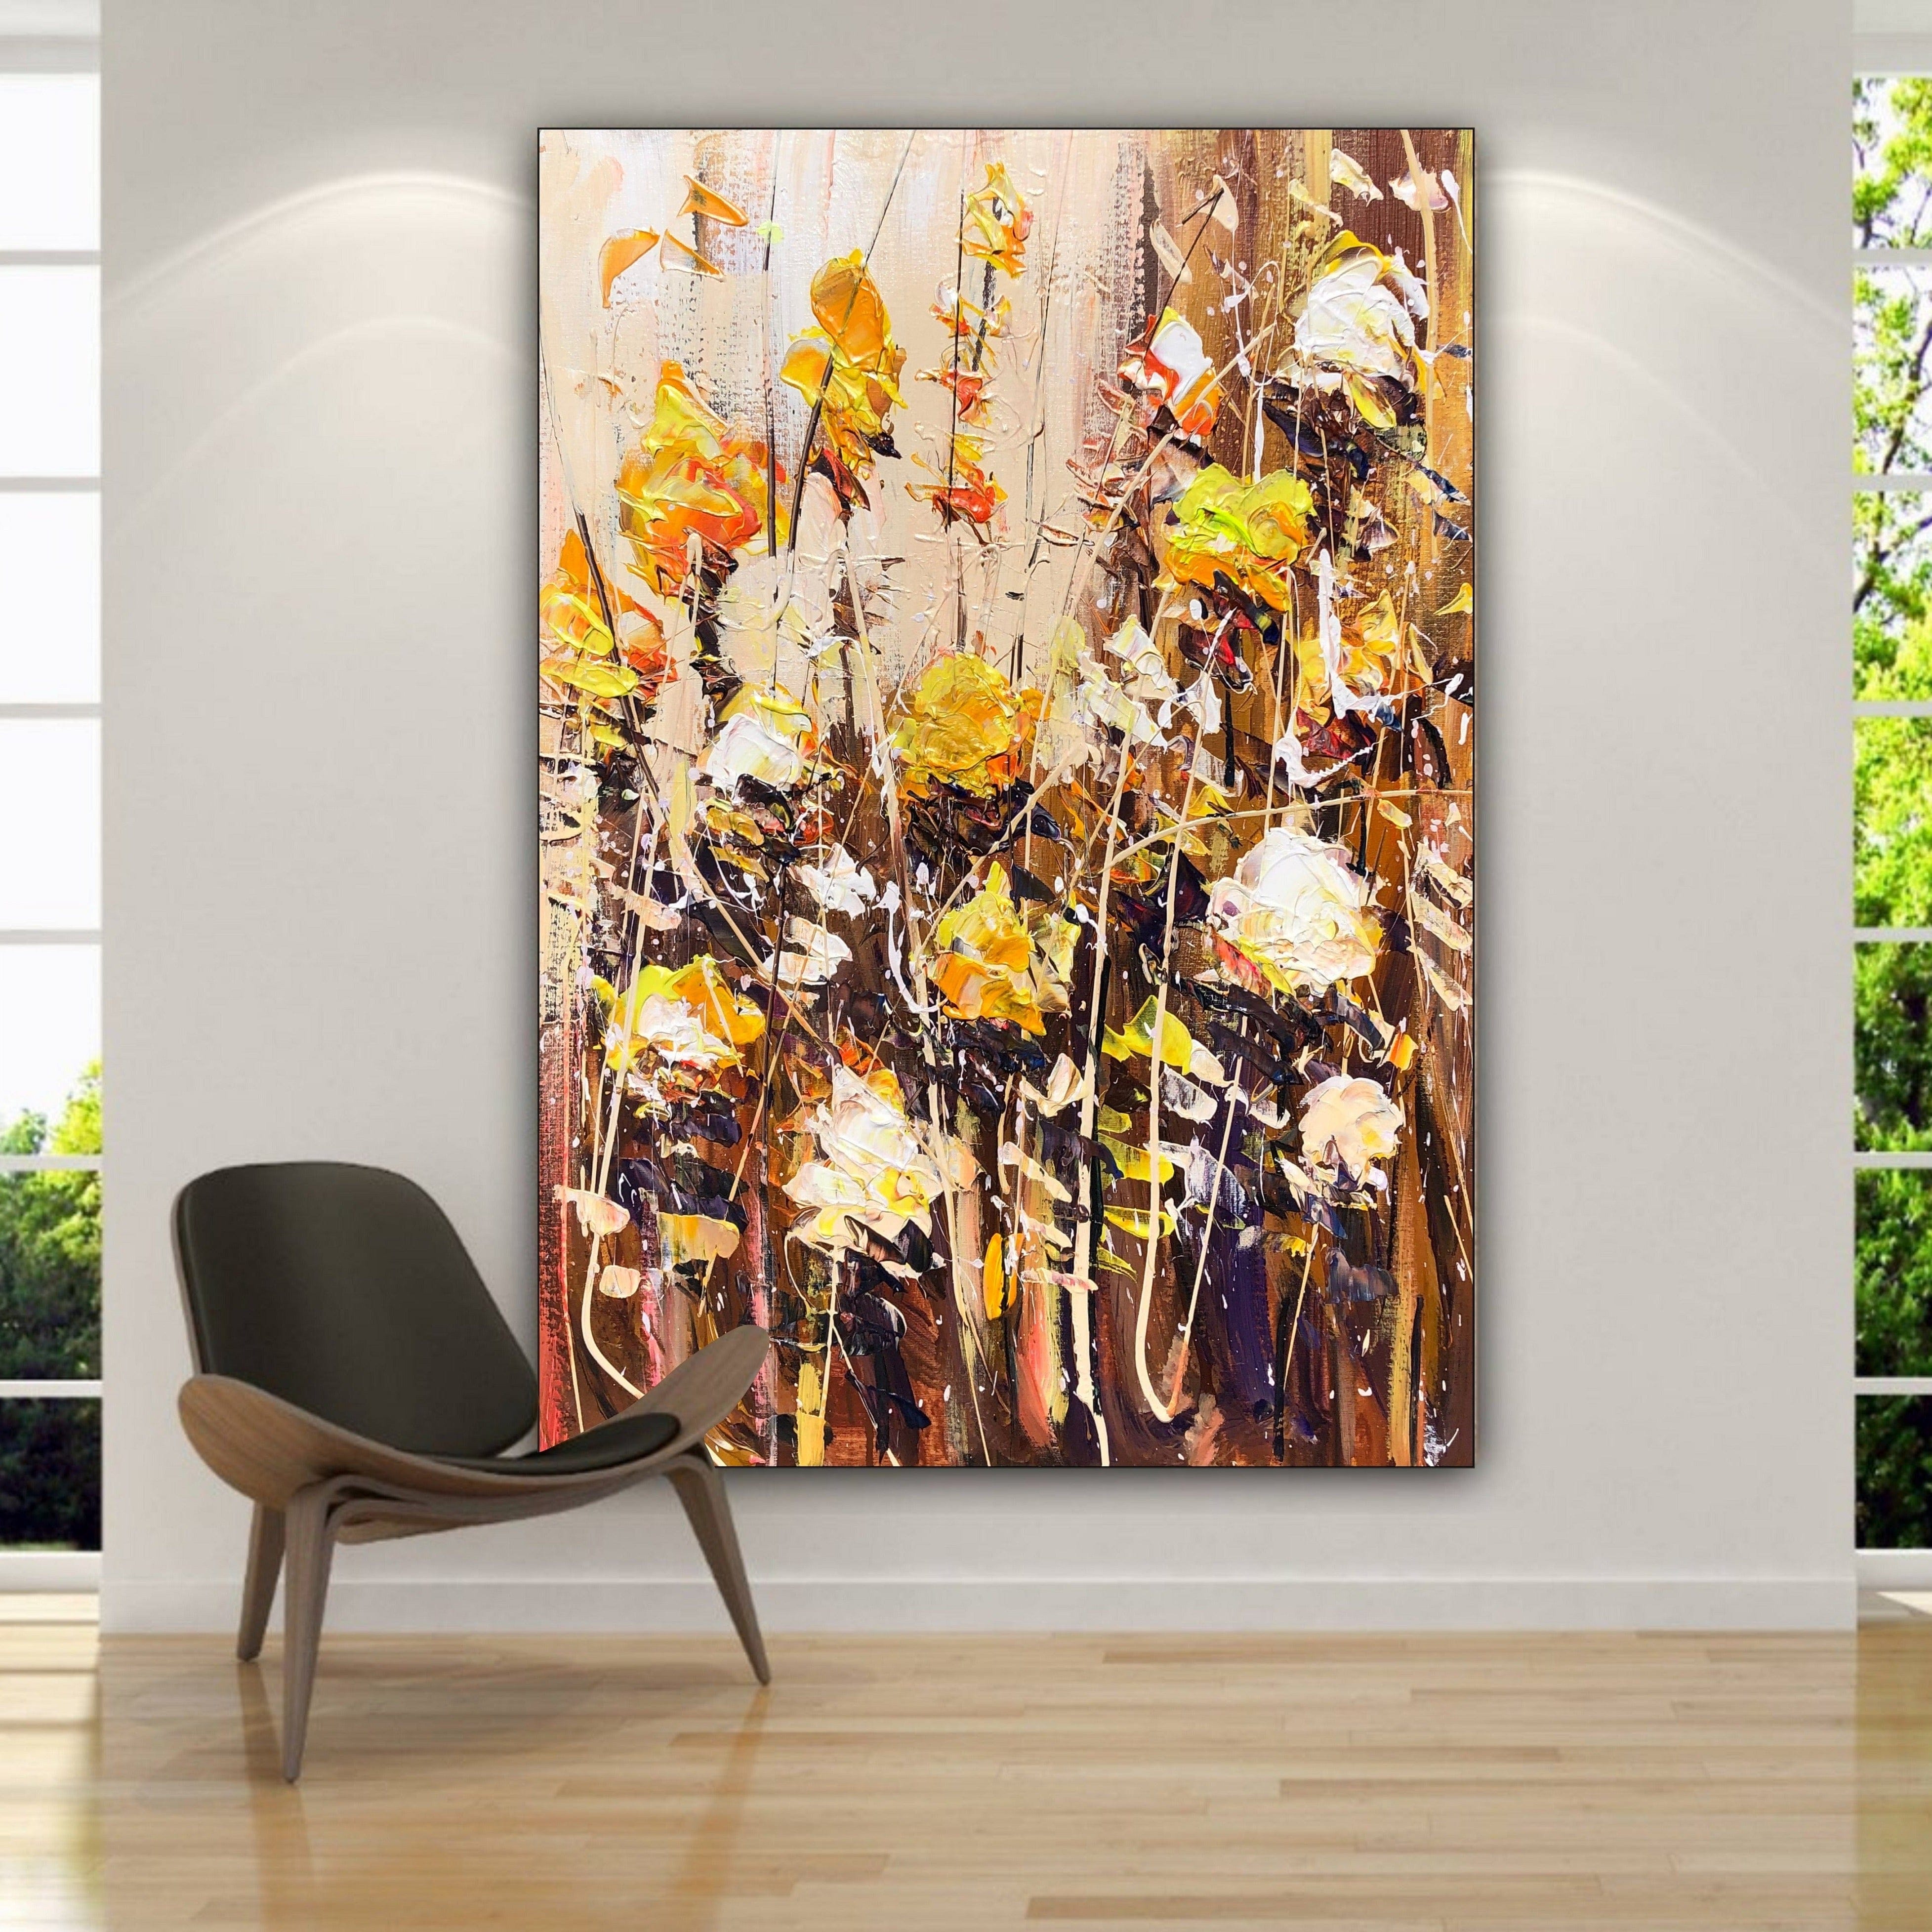 GOLDEN FLOWERS from $310